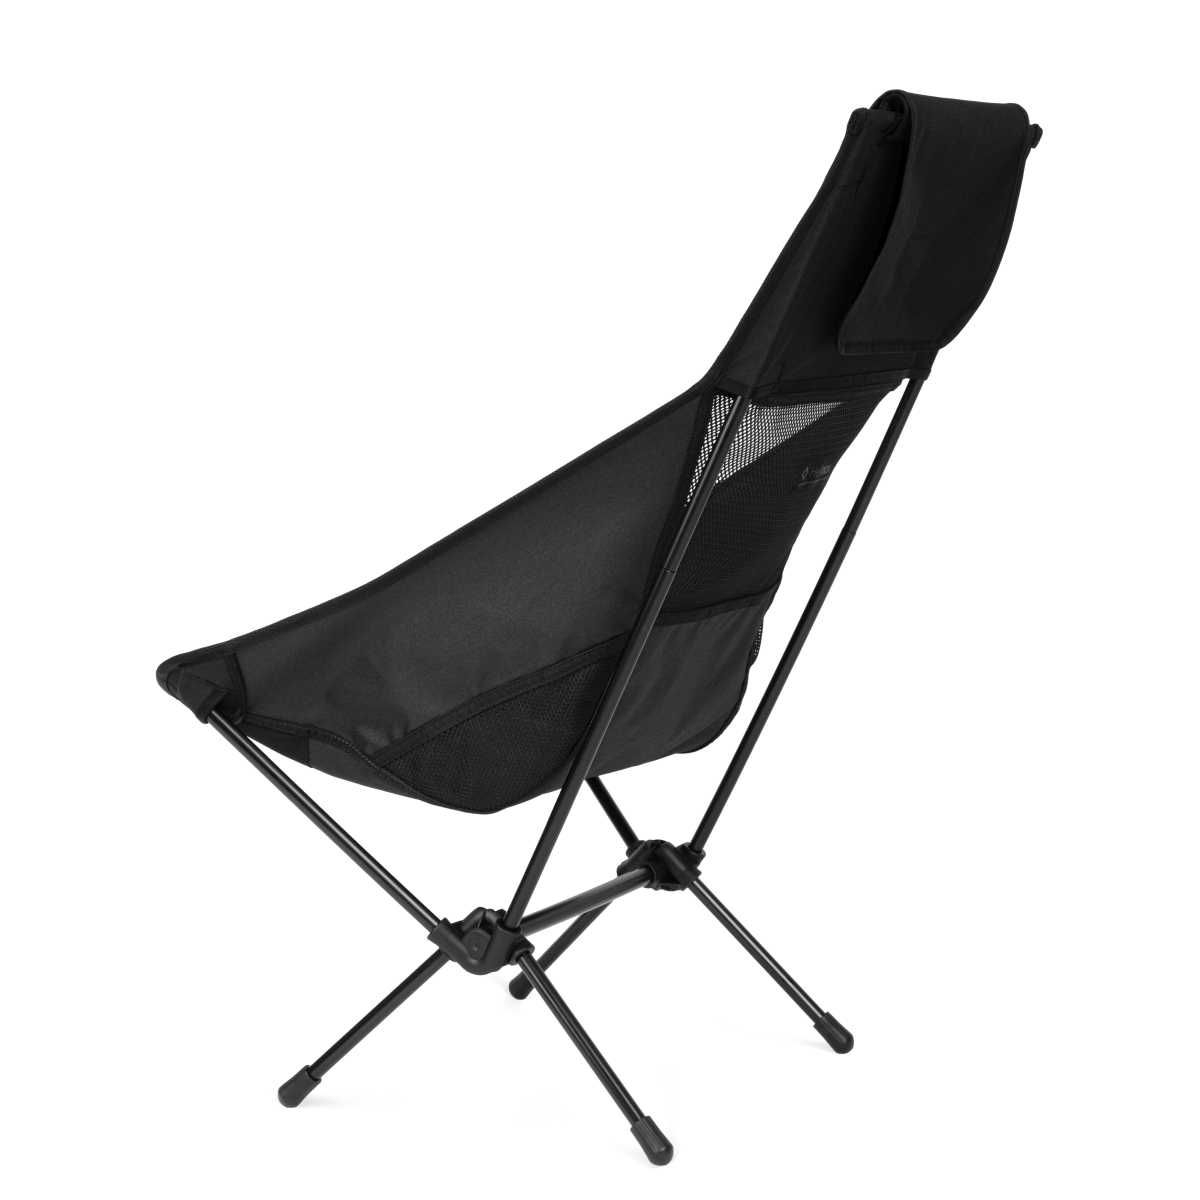 HELINOX Chair Two Blackout Edition Campingstuhl 12869R2